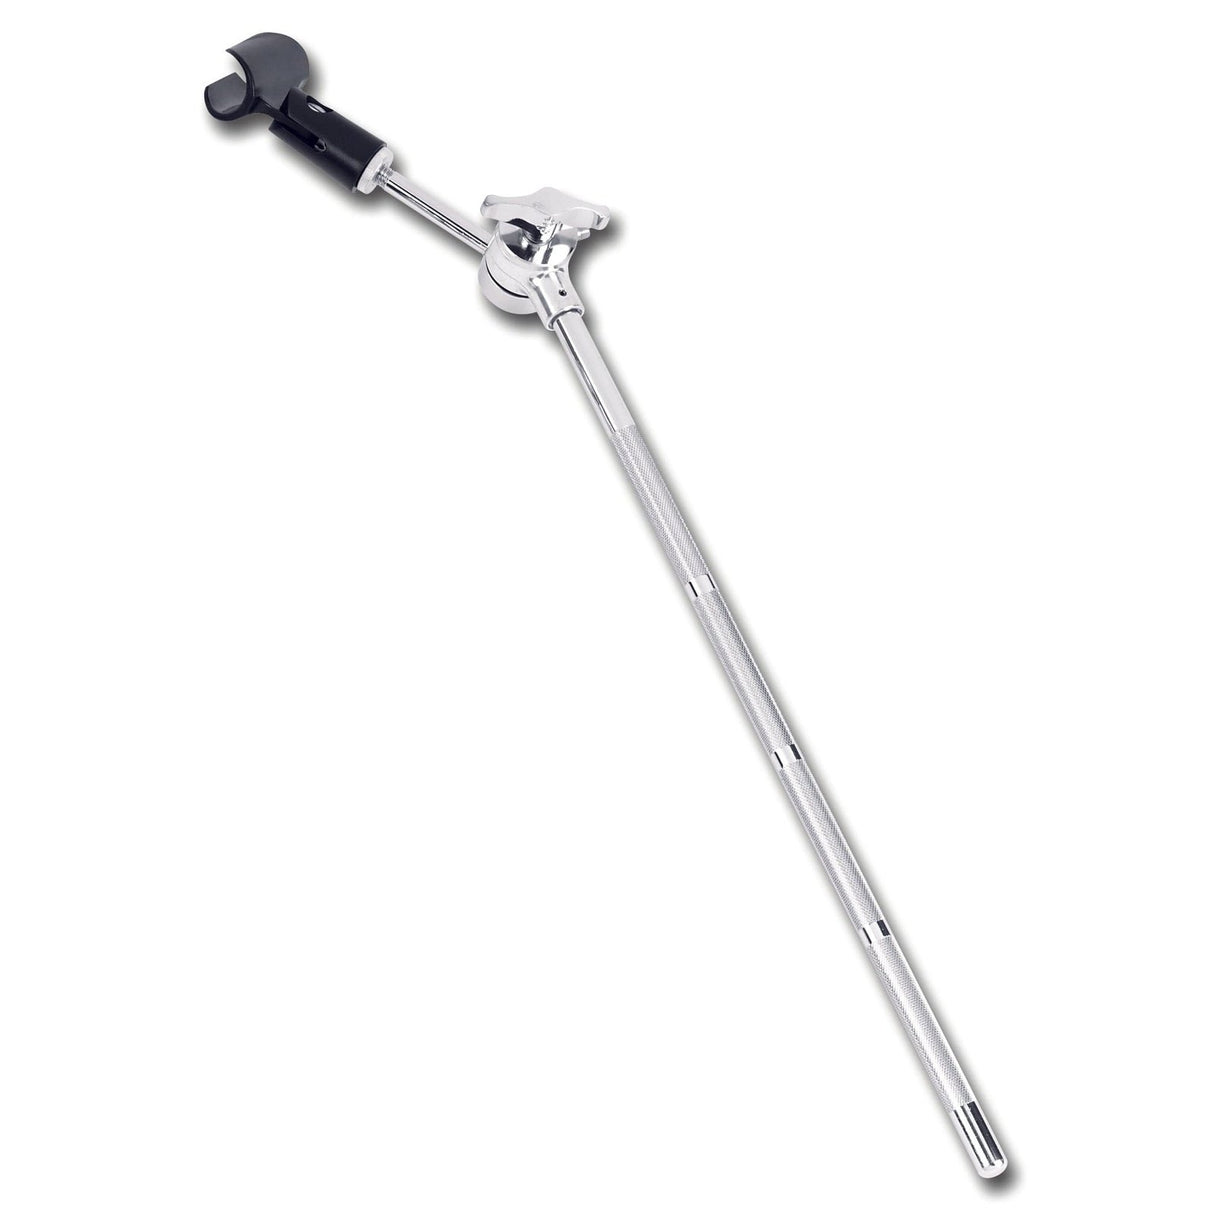 DW DWSMTAMC 1/2" to 16" Mic Holder Arm with Tilter